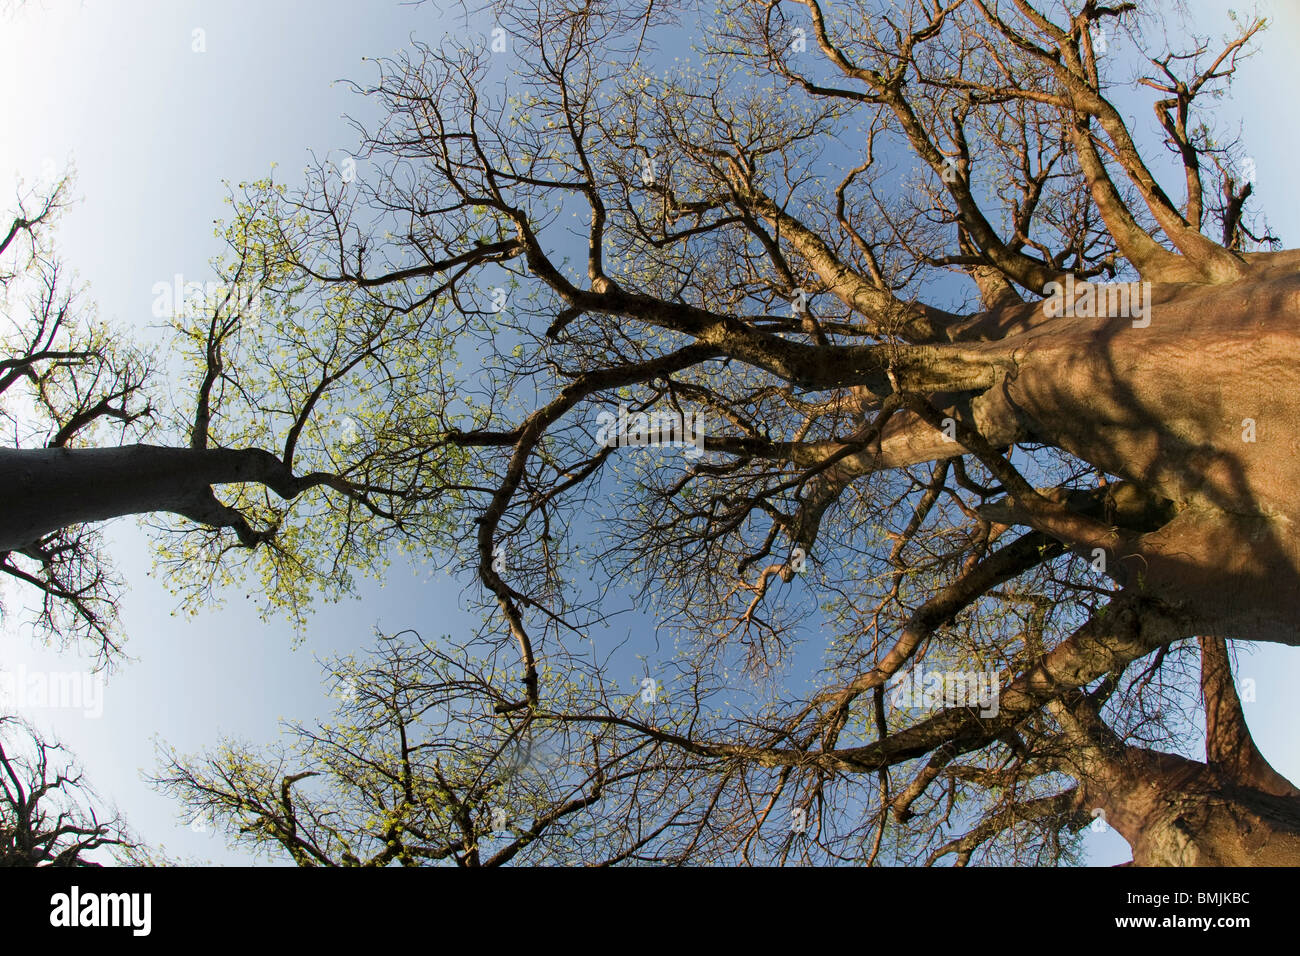 Botswana, Nxai Pan National Park, Morning sun lights twisted branches of Baines Baobabs, Stock Photo